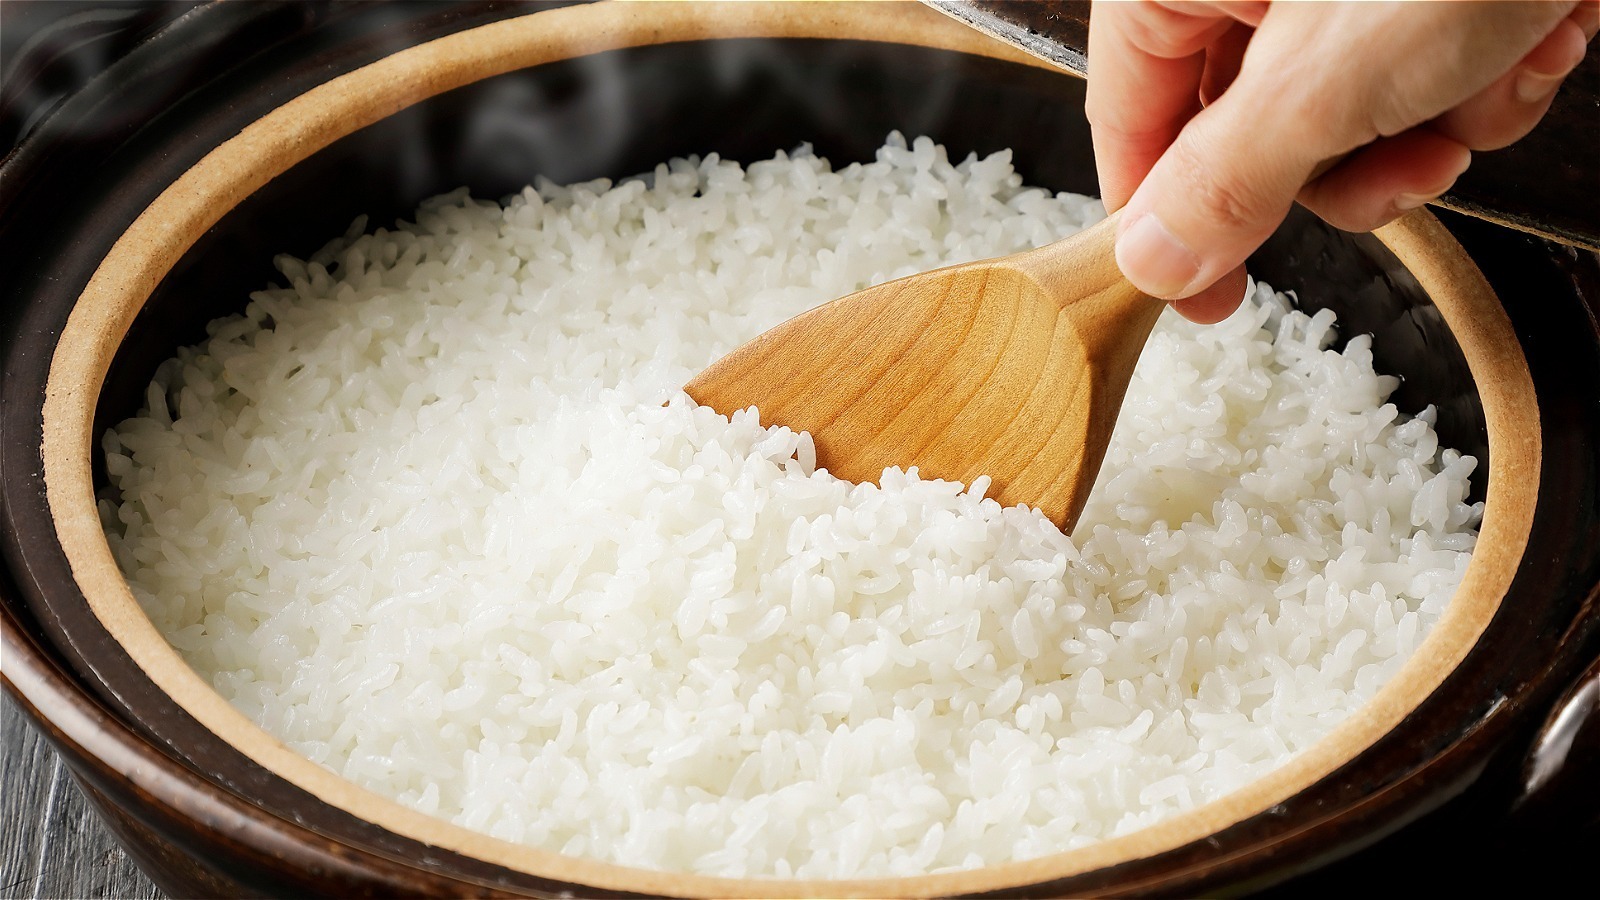 https://www.mashed.com/img/gallery/why-you-should-be-cooking-your-rice-with-some-vinegar/l-intro-1680705035.jpg